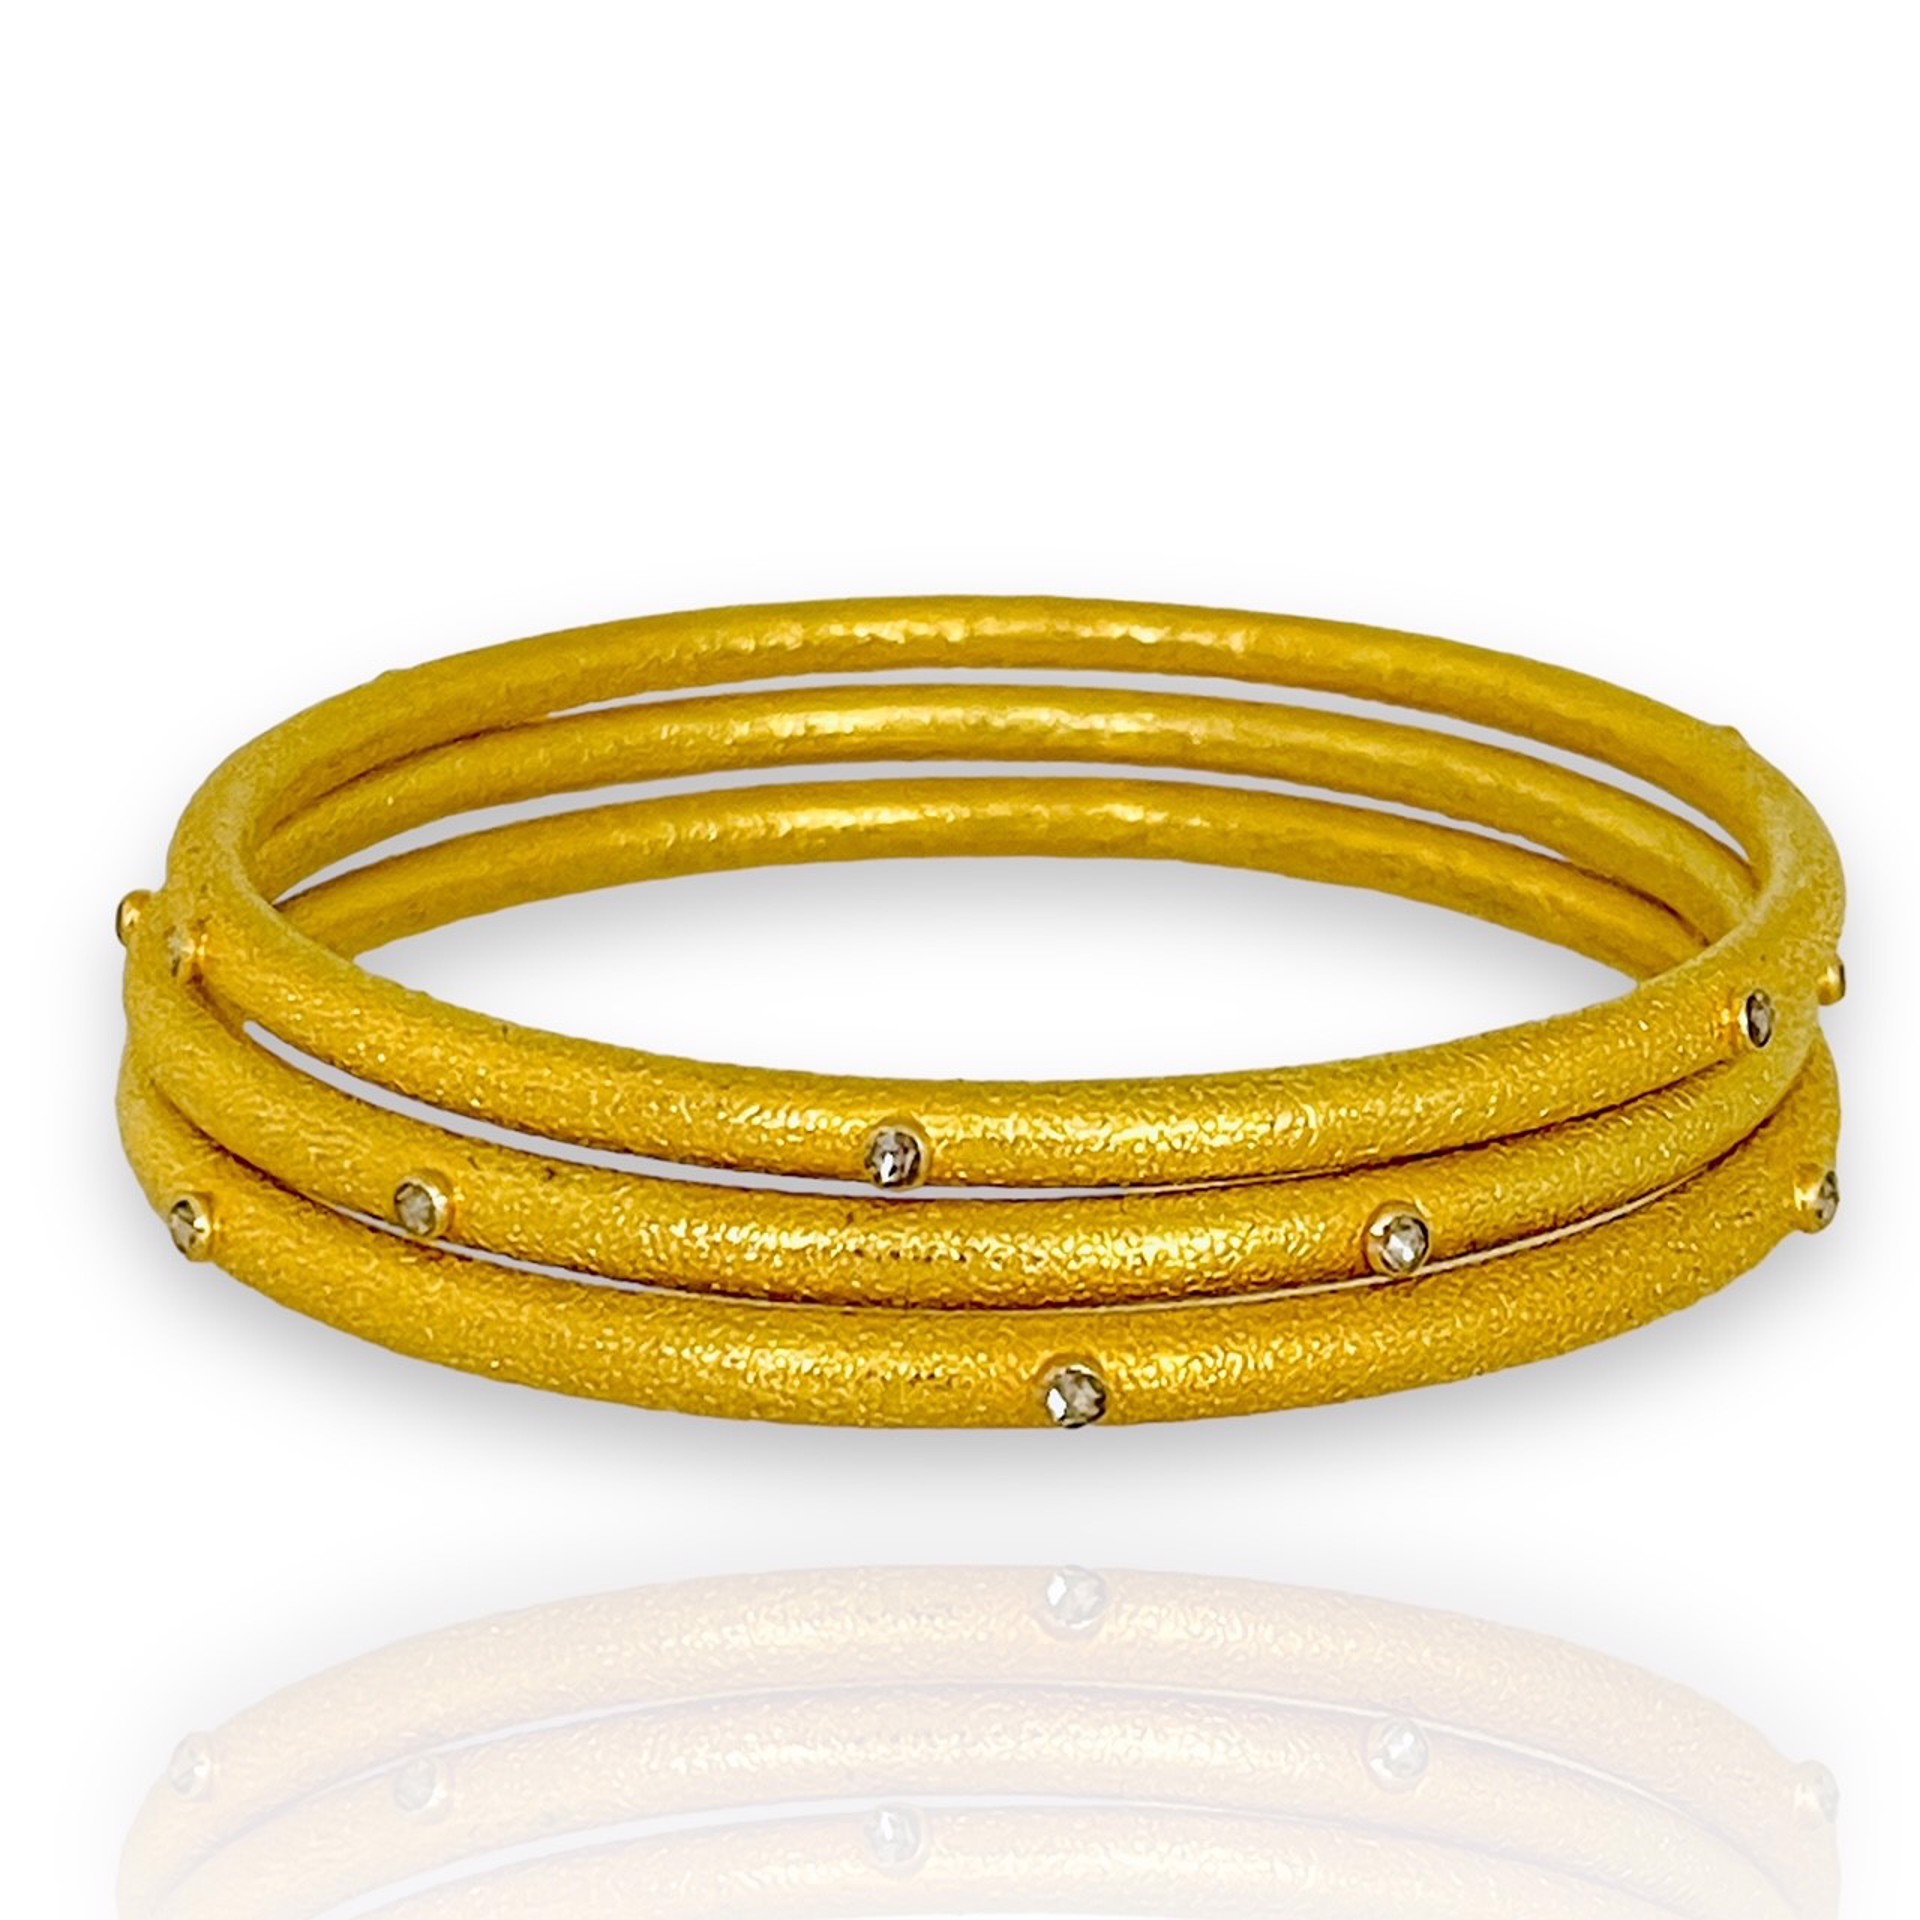 Perfect Bangle- 6 Diamonds and 18k Gold by Mara Labell